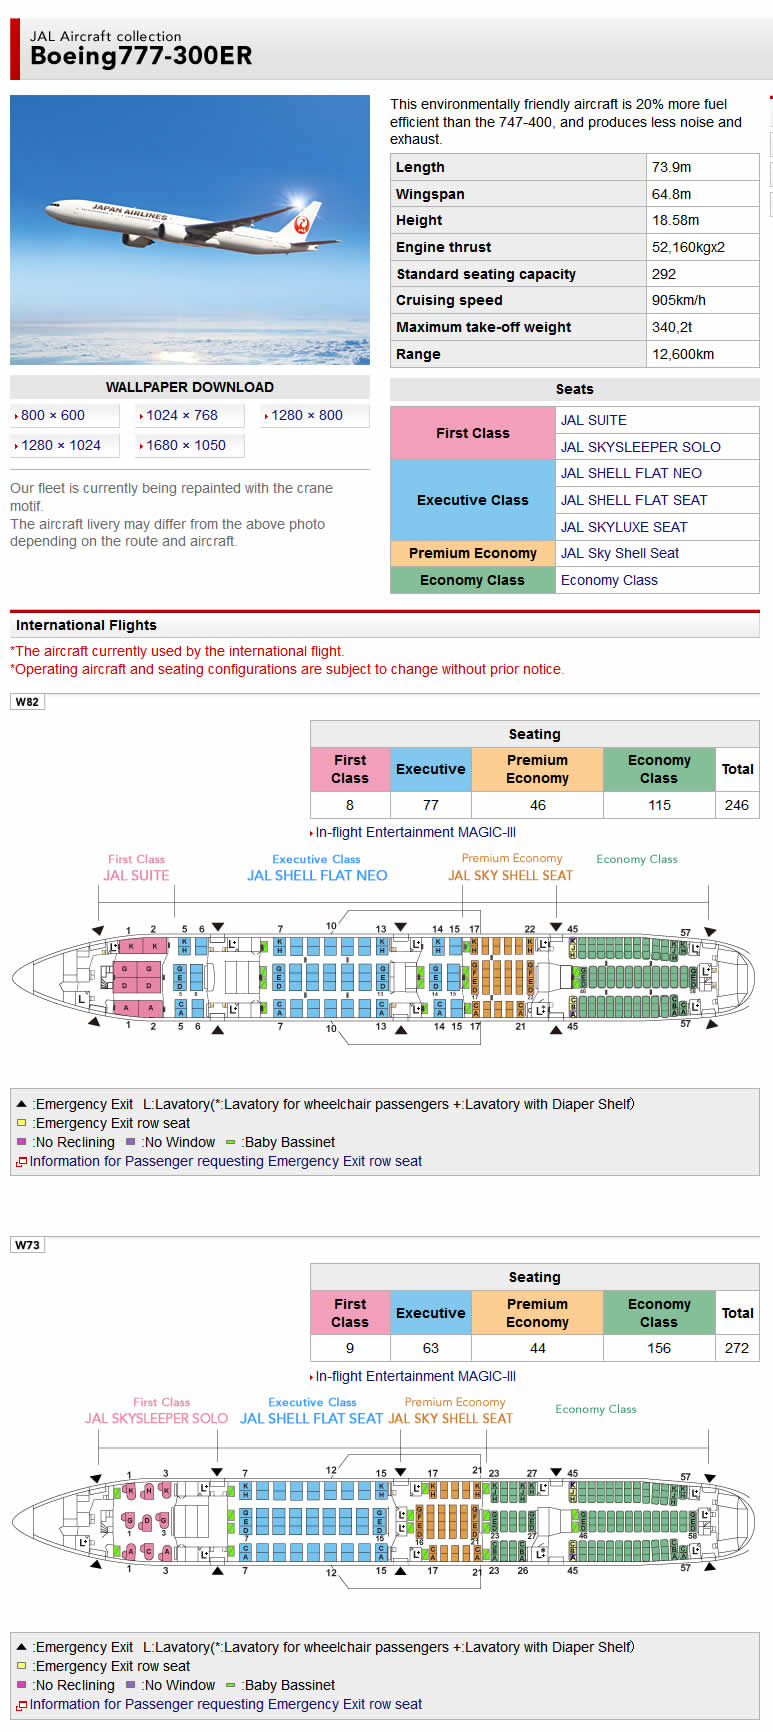 JAL JAPAN AIR AIRLINES BOEING 777-300ER AIRCRAFT SEATING CHART